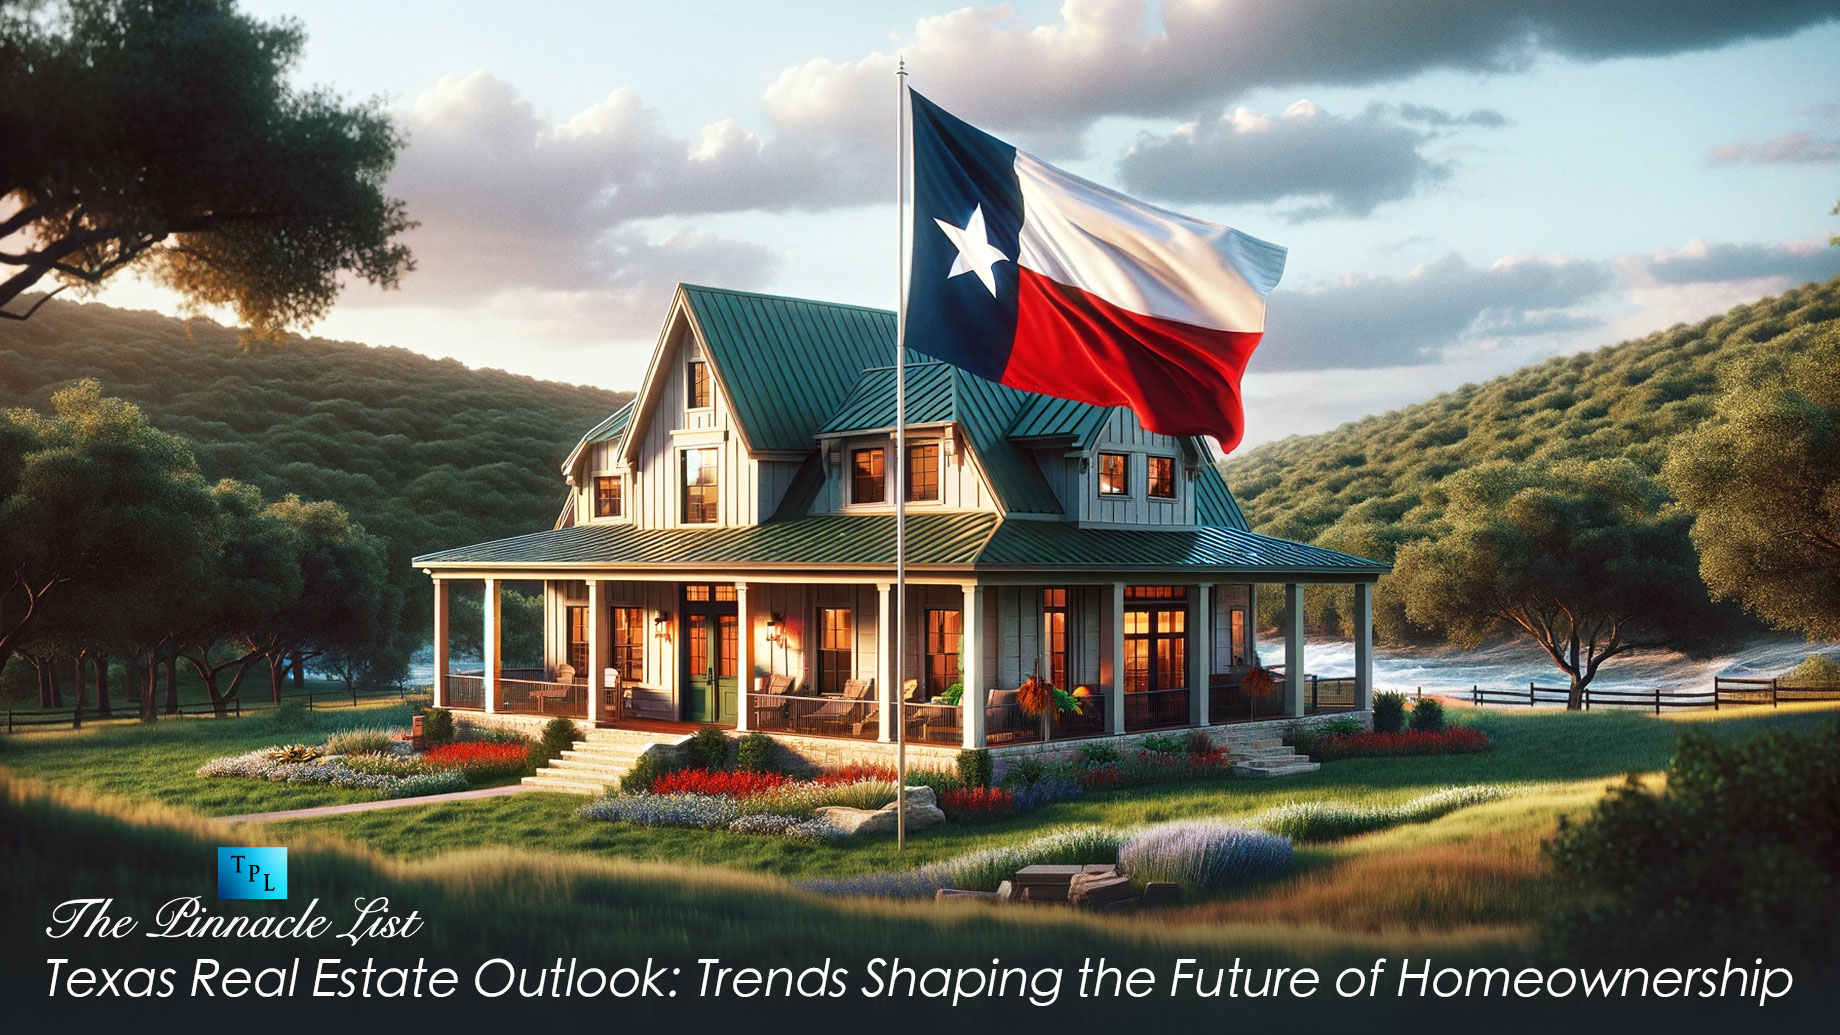 Texas Real Estate Outlook: Trends Shaping the Future of Homeownership